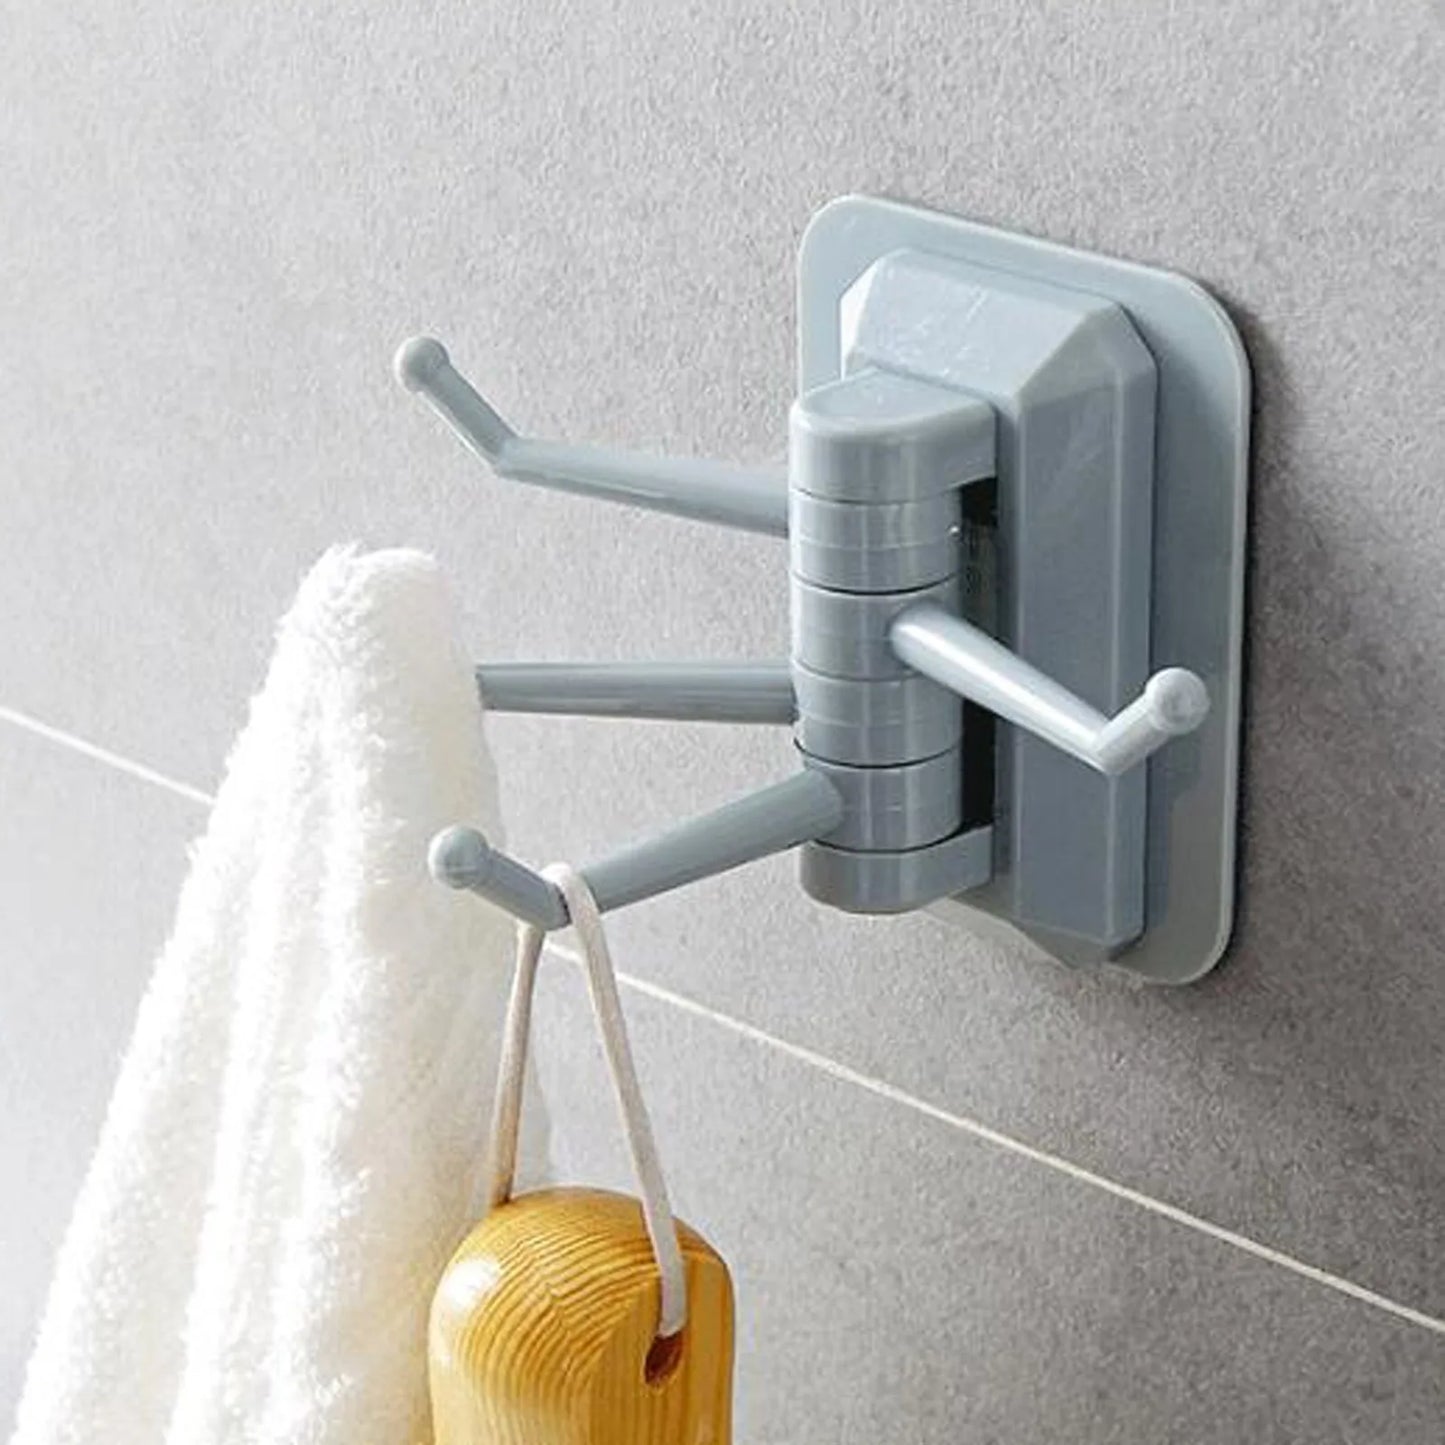 Strong Self-Adhesive Wall 4 Hook Key Holder - No Drilling Needed, Kitchen Towel Hanger Hooks, Home Storage Accessories